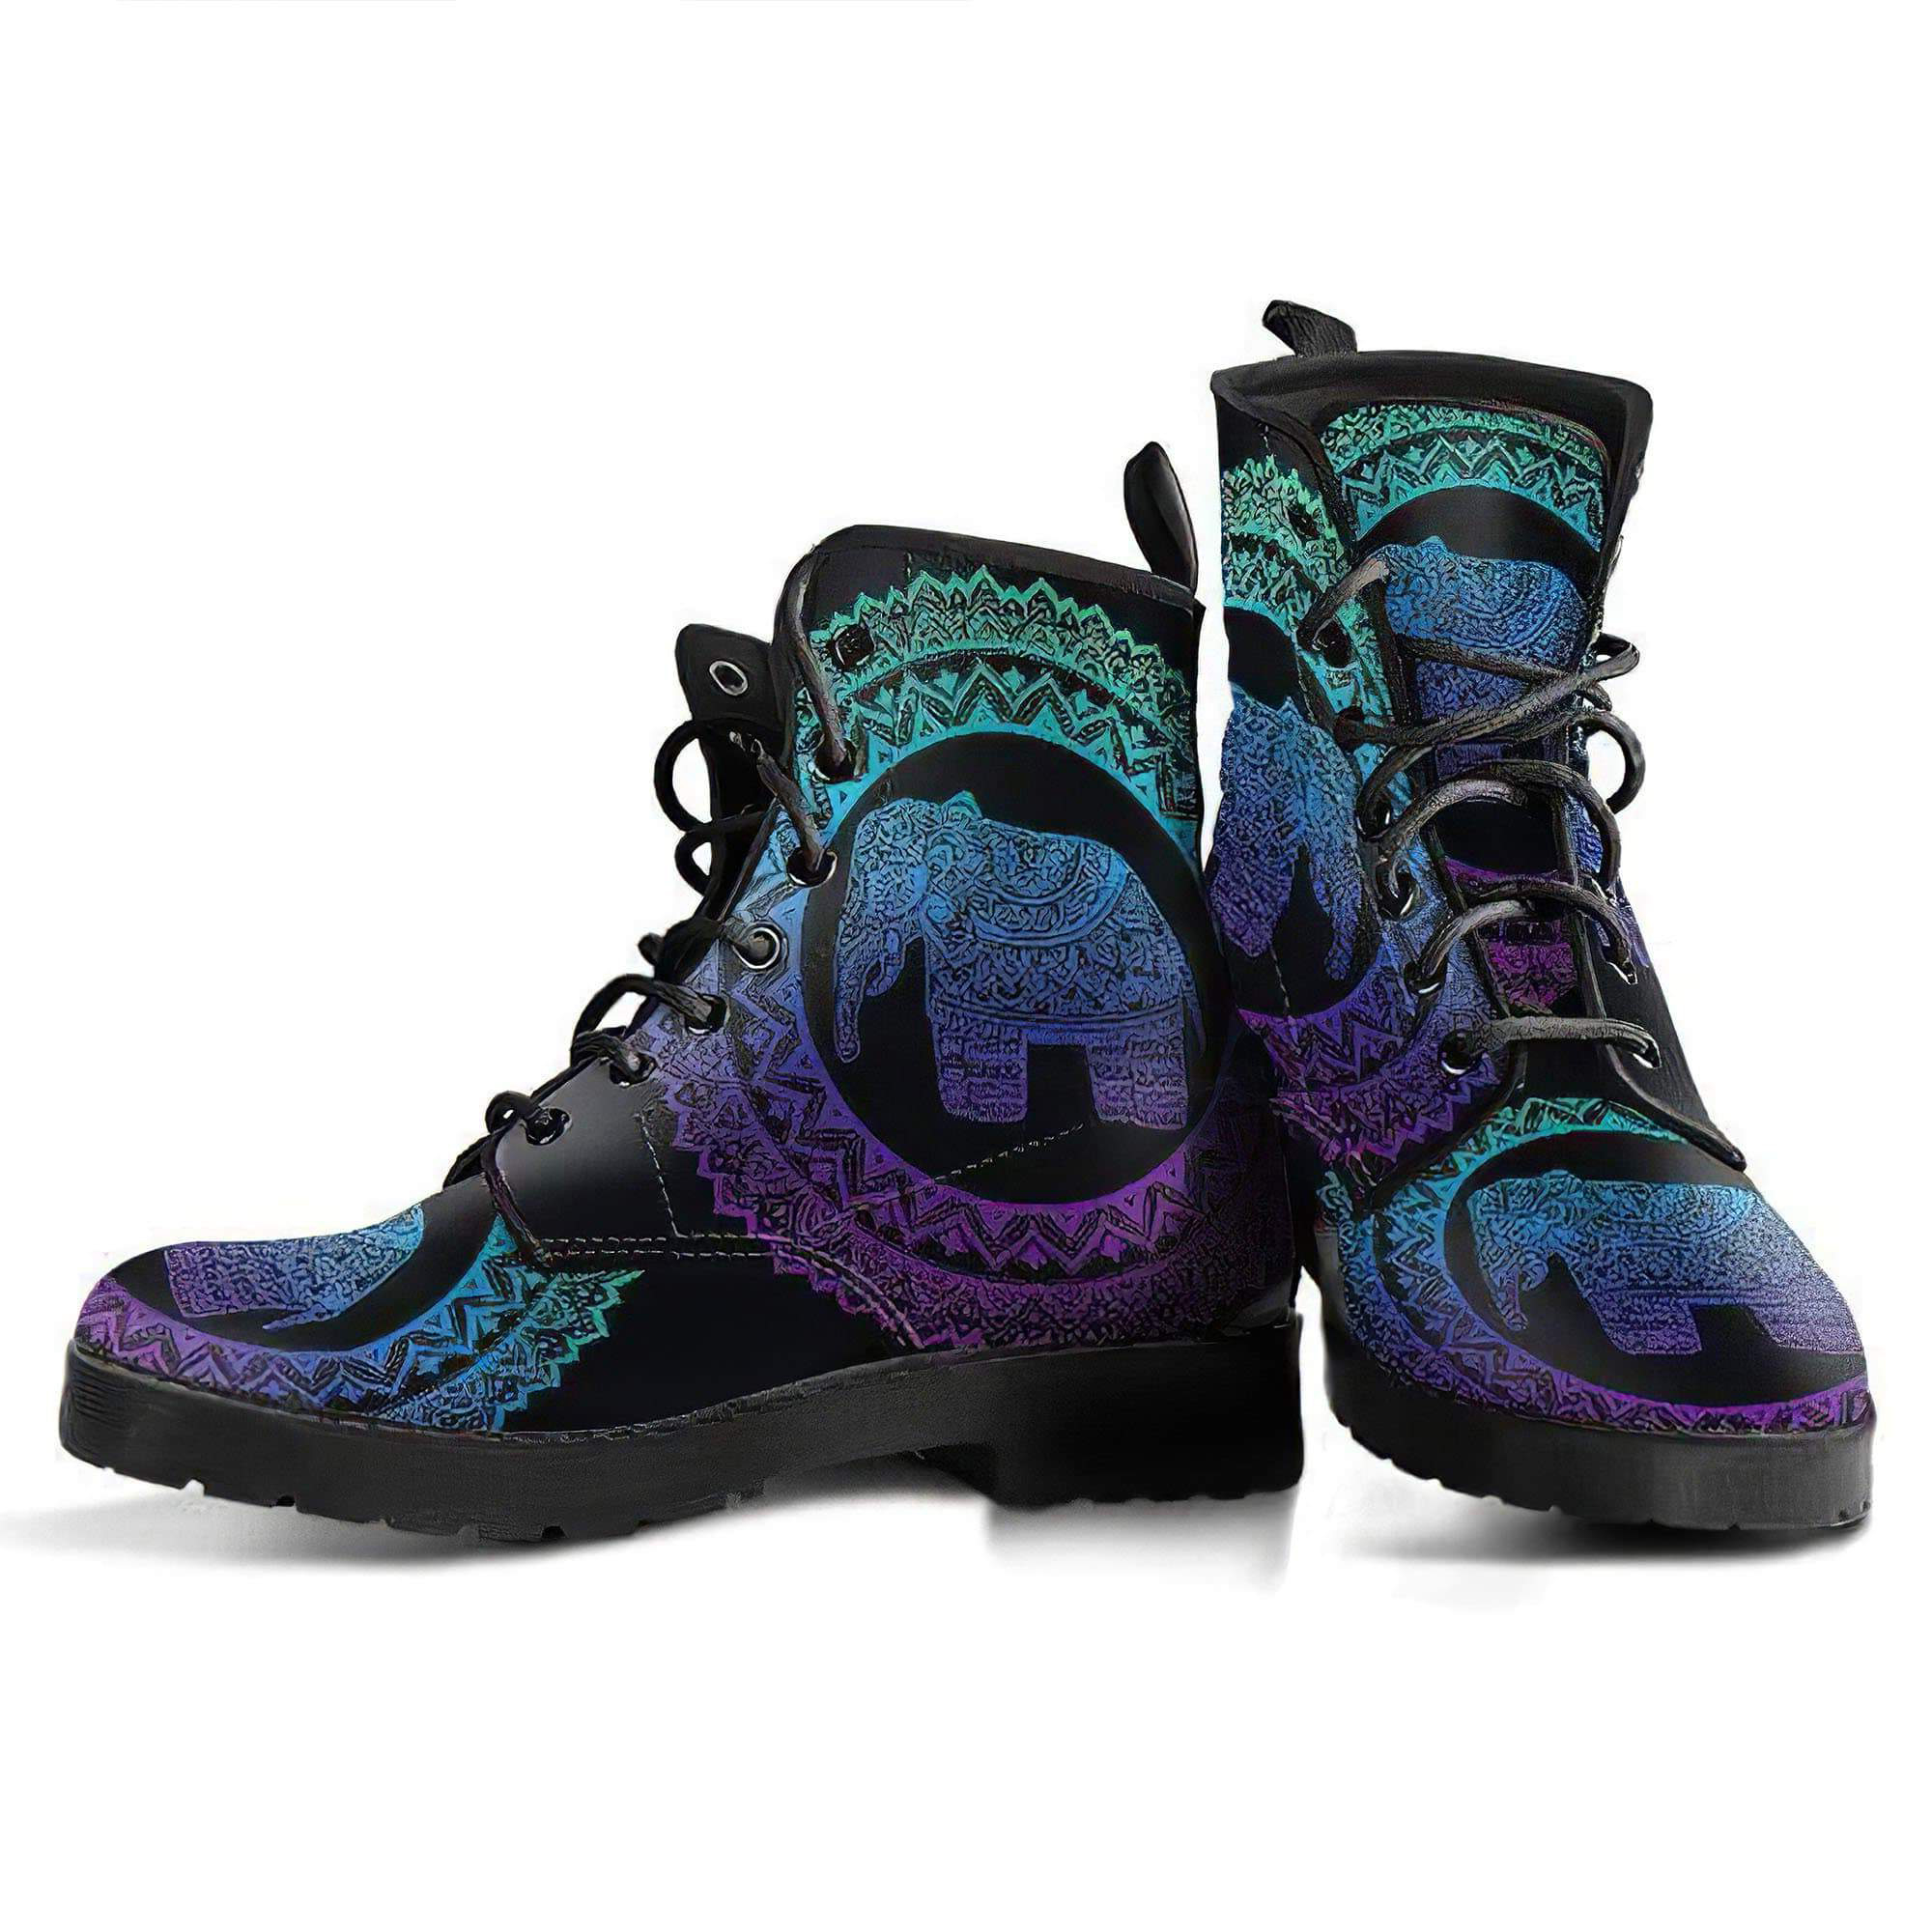 purple-elephant-handcrafted-boots-women-s-leather-boots-12051935330365.jpg